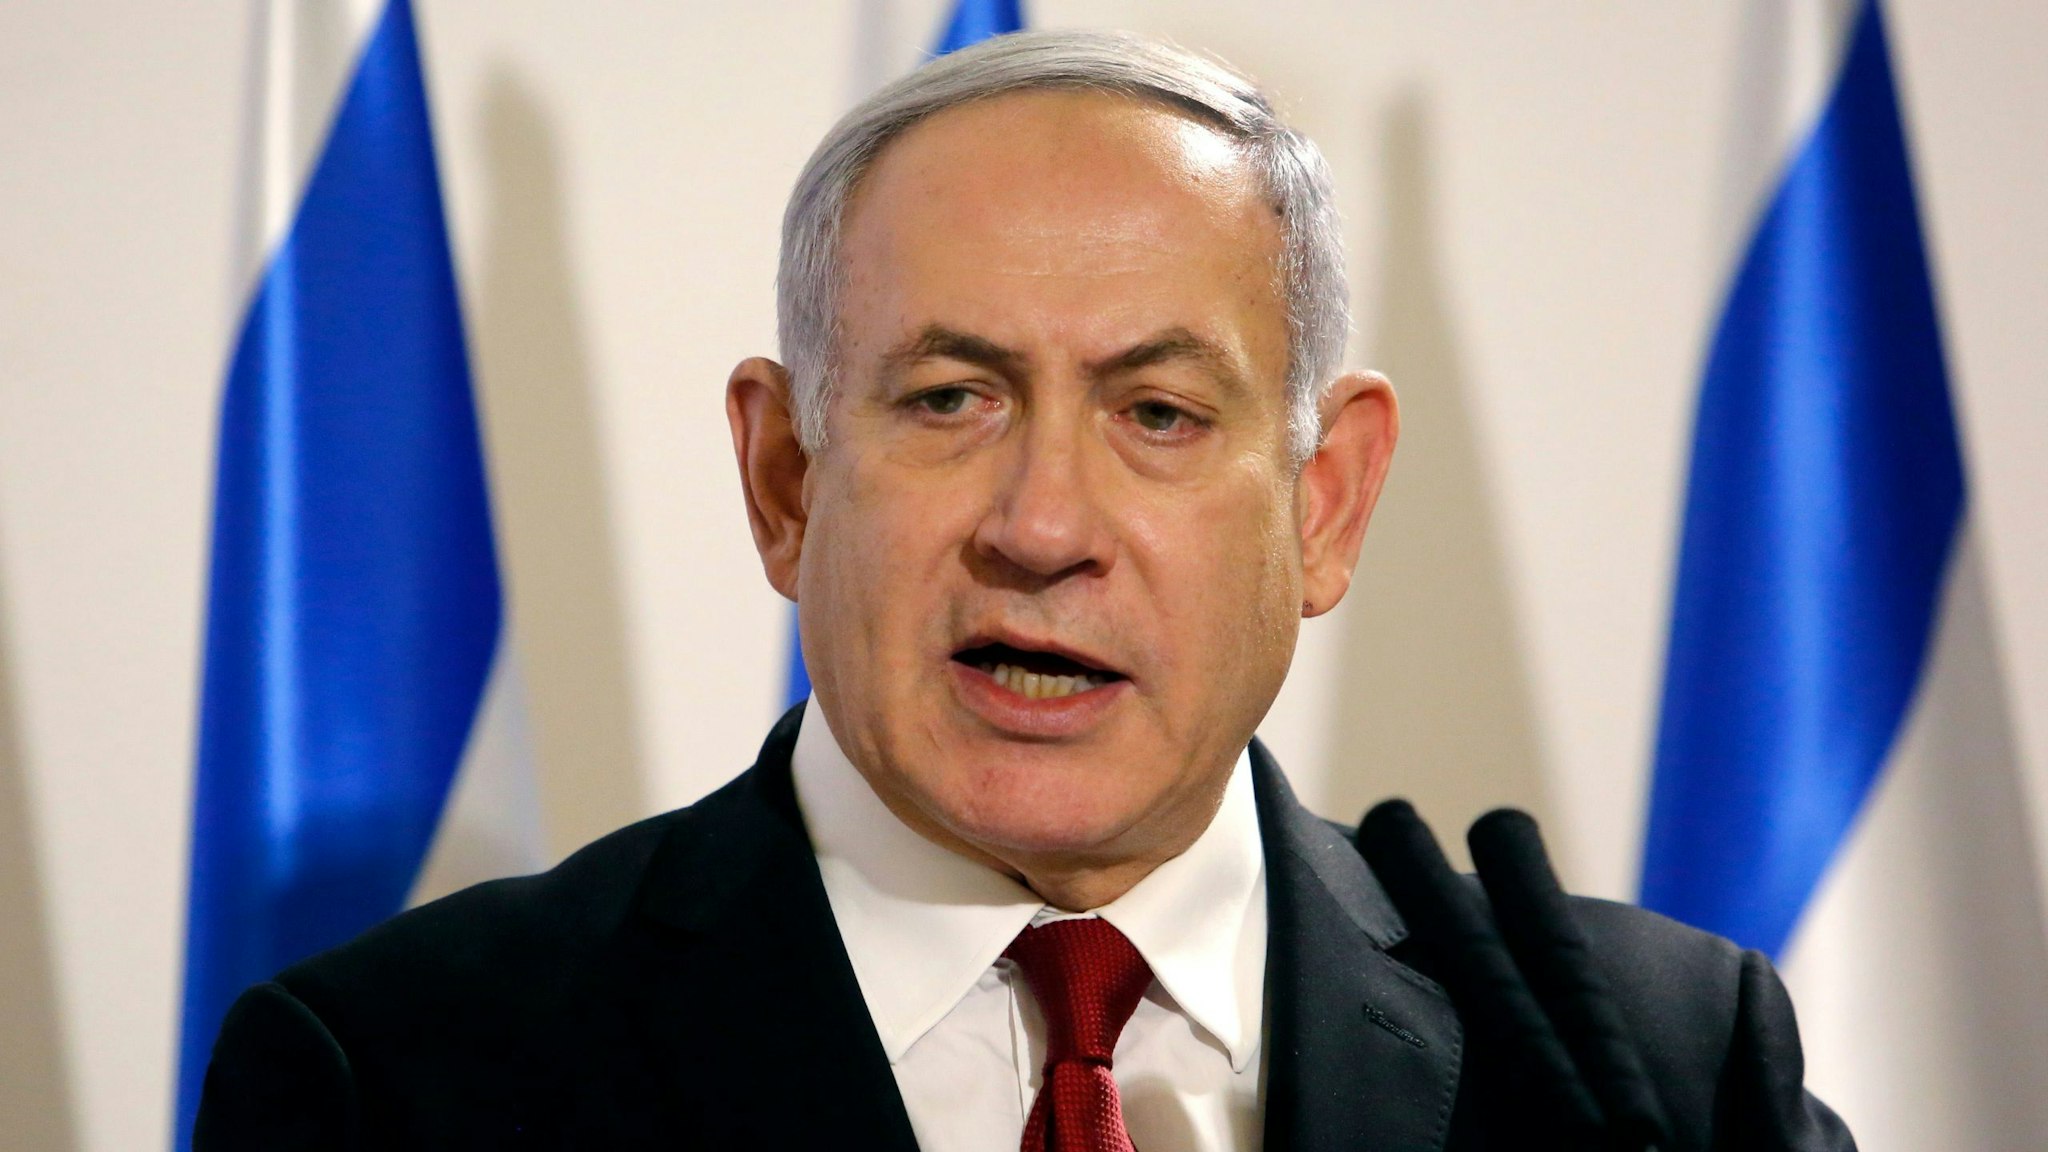 Israeli Prime Minister Benjamin Netanyahu addresses the media at the Defence Ministry in Tel Aviv on November 12, 2019. - Israel's military killed a commander of Palestinian militant group Islamic Jihad in a strike on his home in the Gaza Strip early in the morning, prompting retaliatory rocket fire and fears of a severe escalation in violence.